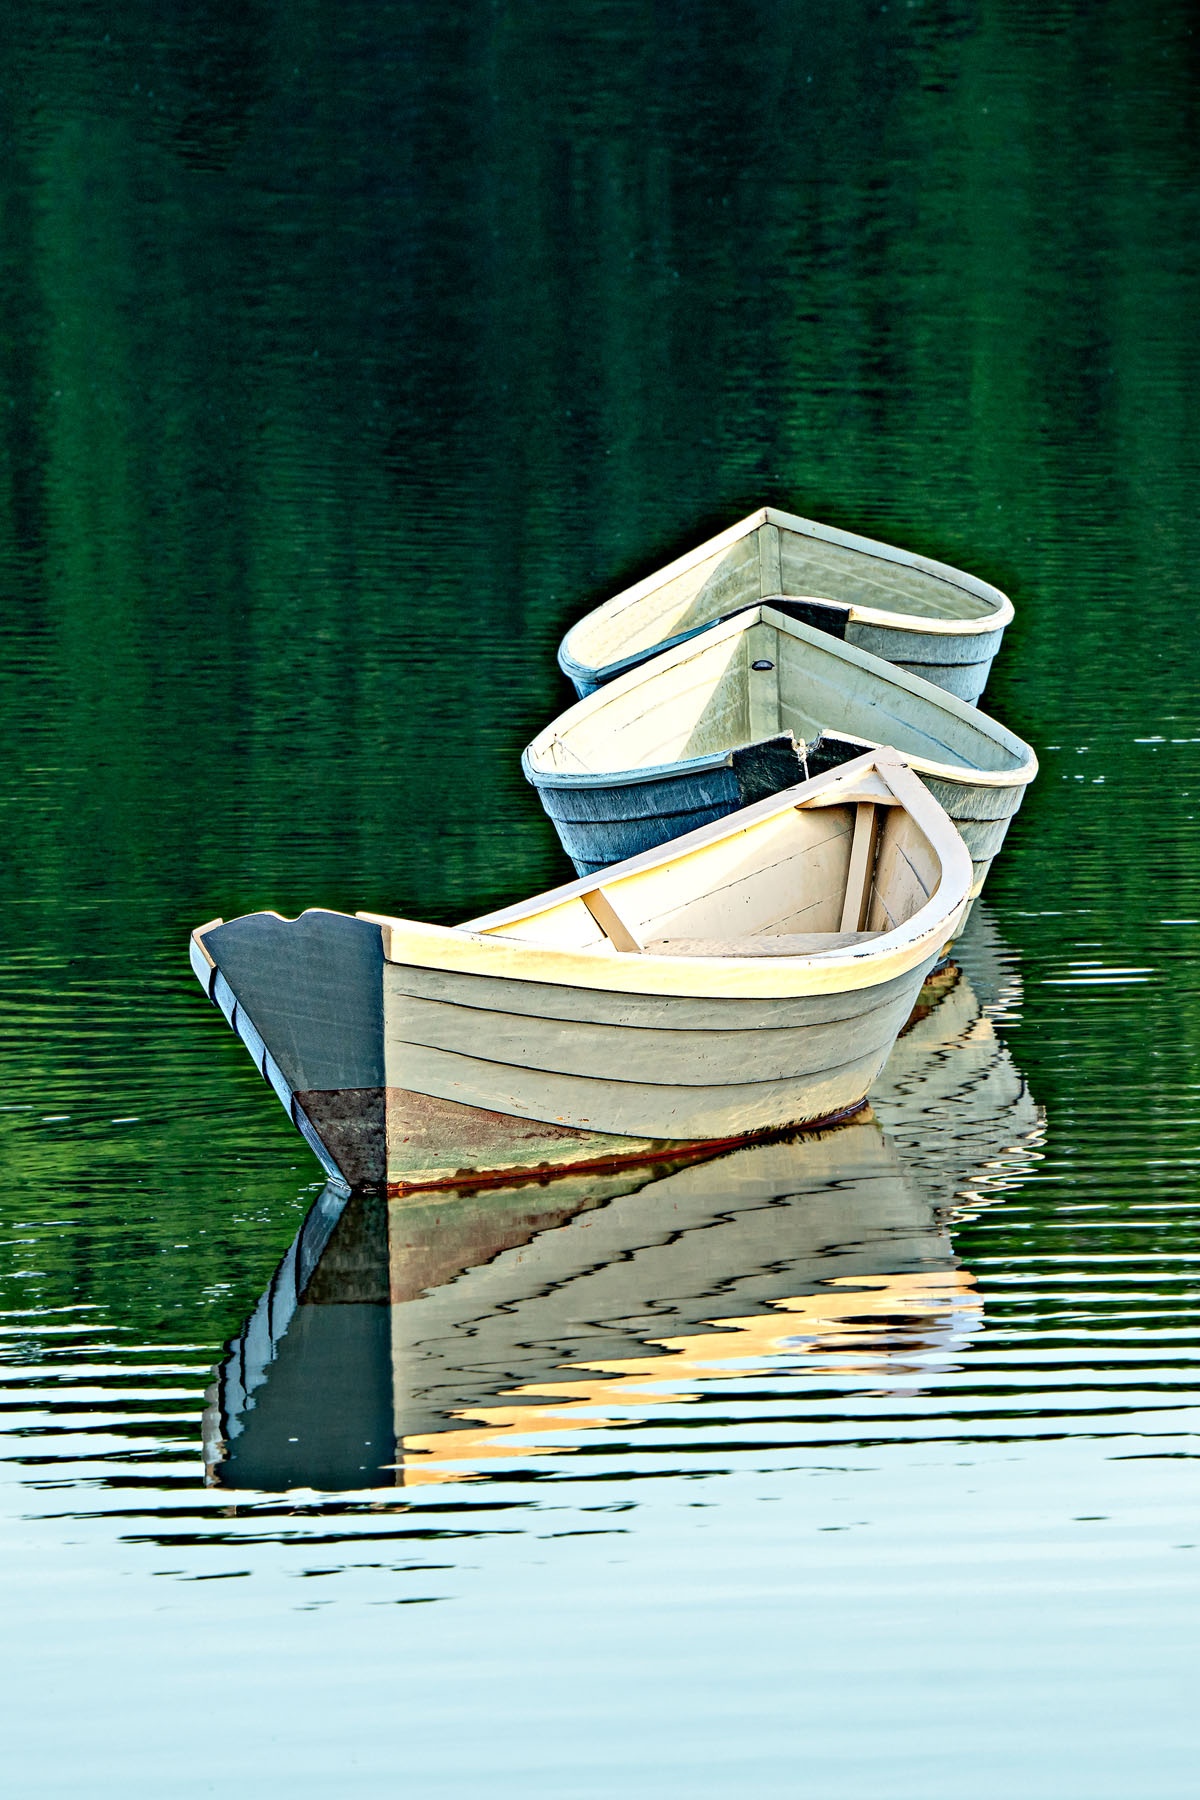 THREE DORIES - These three boats(dories) are anchored in the water in the town of Kennebunkport, Maine. Wind, tide and activity cause them to move constantly. They appear to dance in the water. Light and water level change the show throughout the day. They have become a town icon. This is one of many photos I took while there.